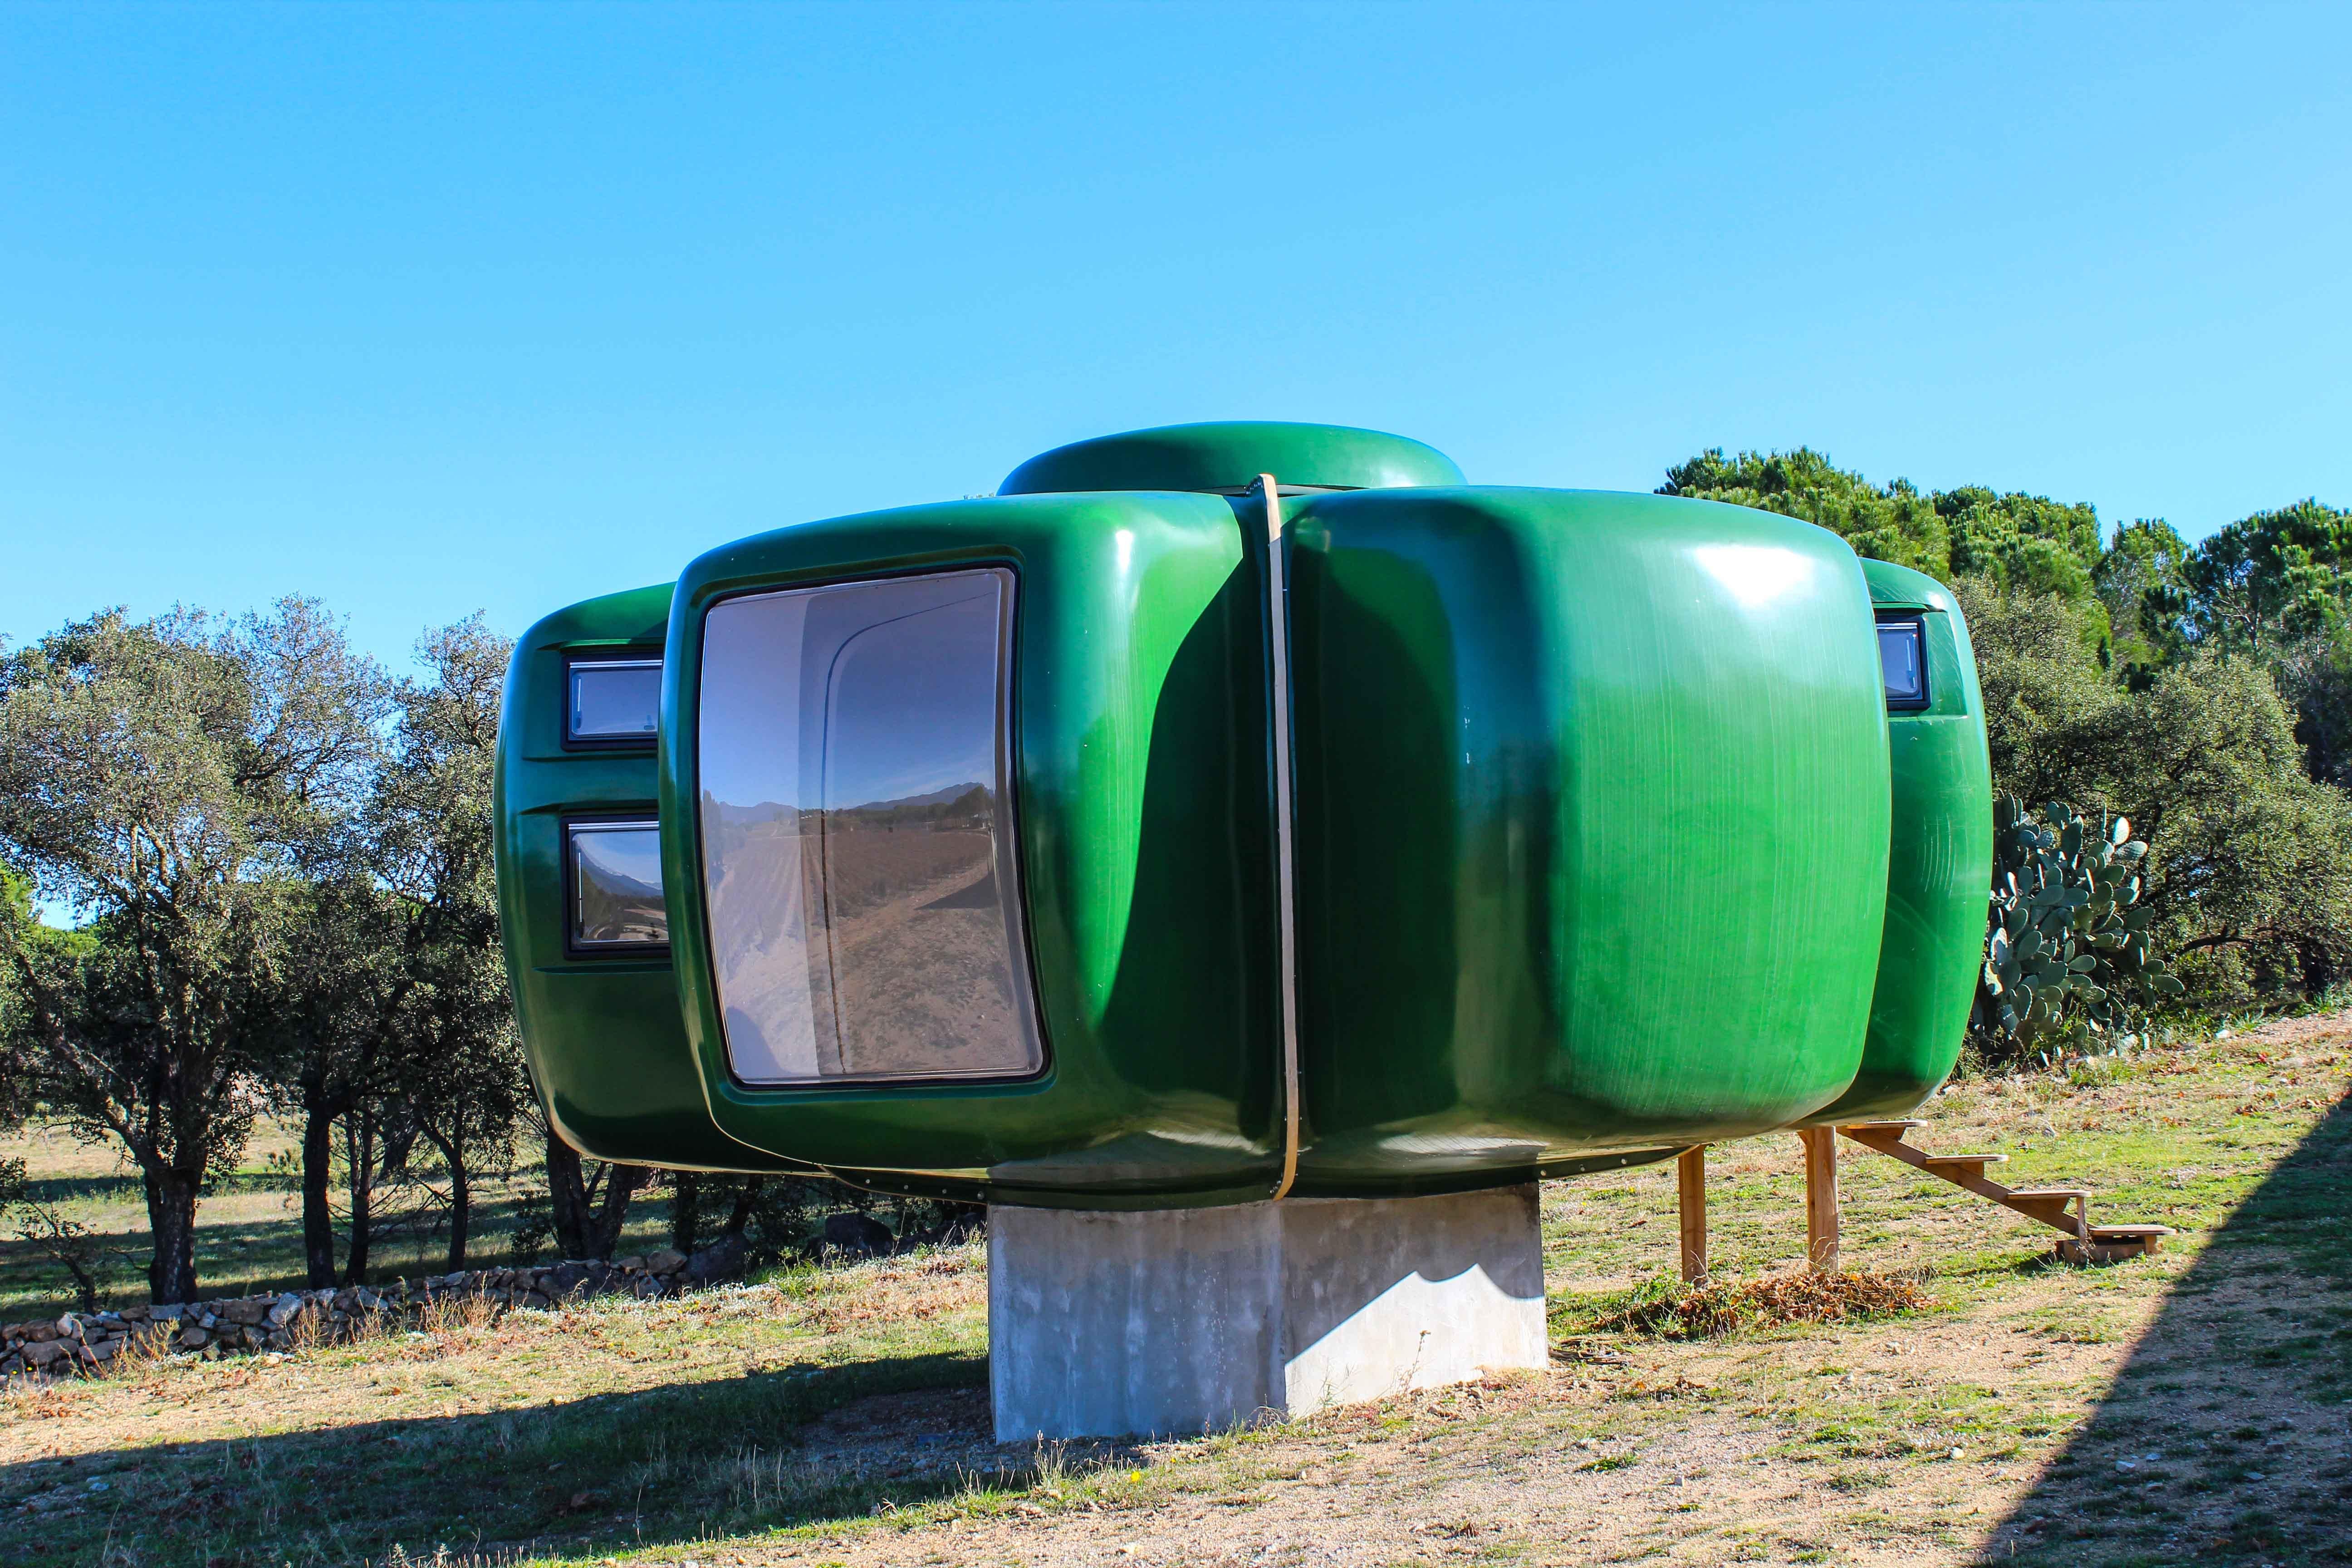 Jean-Benjamin Maneval Bubble House (Maison Bulle).
Entirely renovated with customized elements
40 m2 (400 ft2) Interior Space
Fiberglass structure
Made of 6 Identical InterJoining shells
circa 1968, France.
Very good vintage condition.
Jean